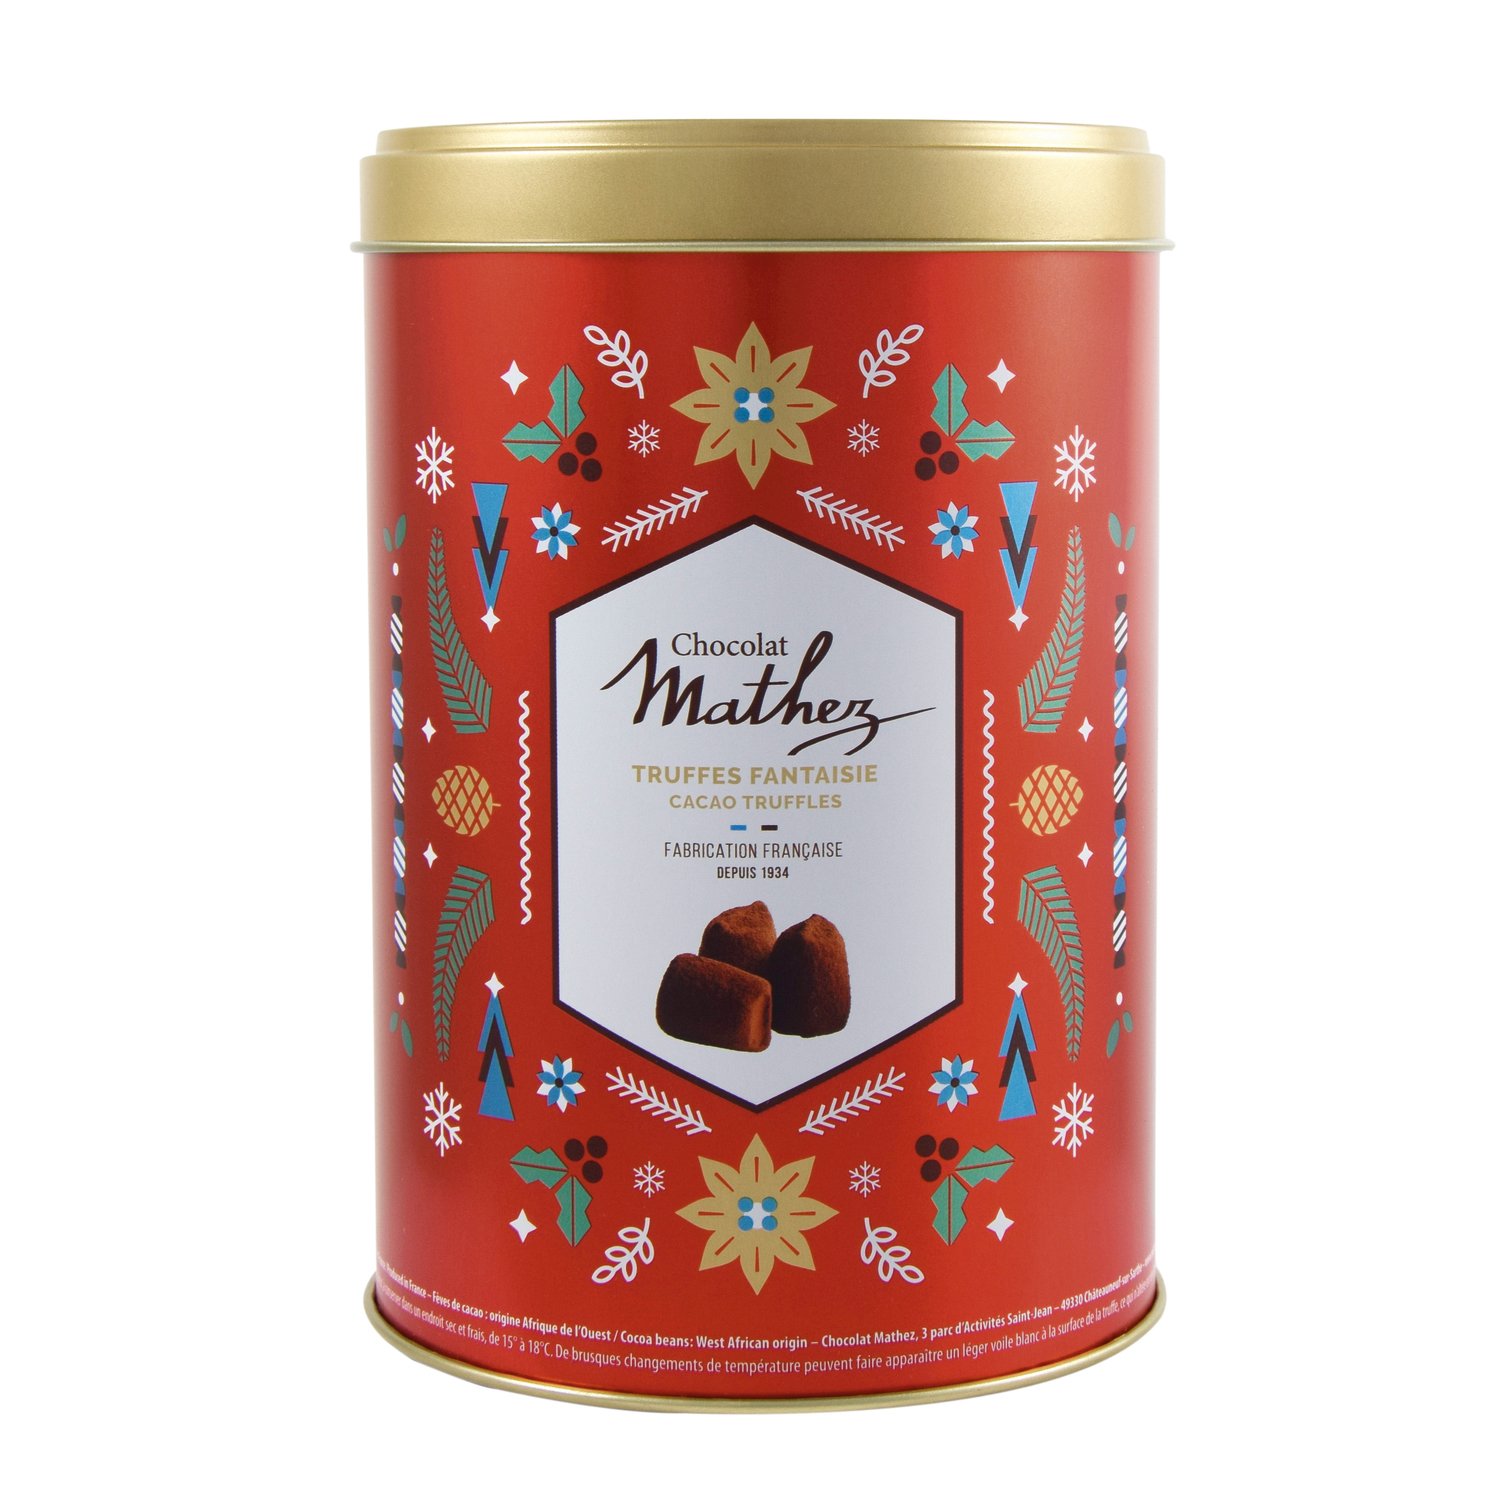 Mathez original French cocoa truffles in red Christmas design tin - 10x500g